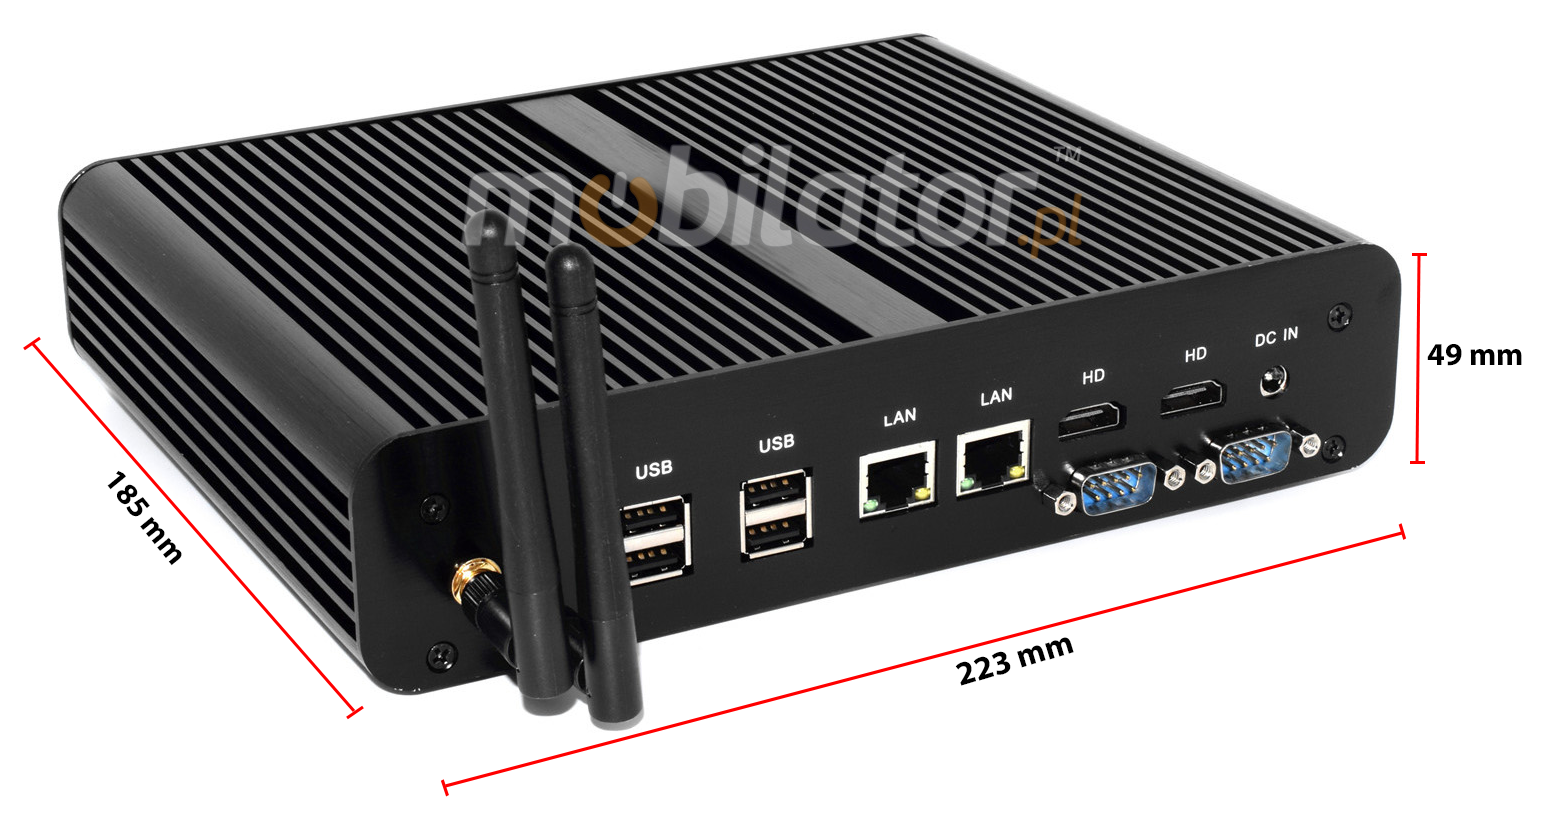 HyBOX P05B efficient, fast and reliable mini pc with small dimensions